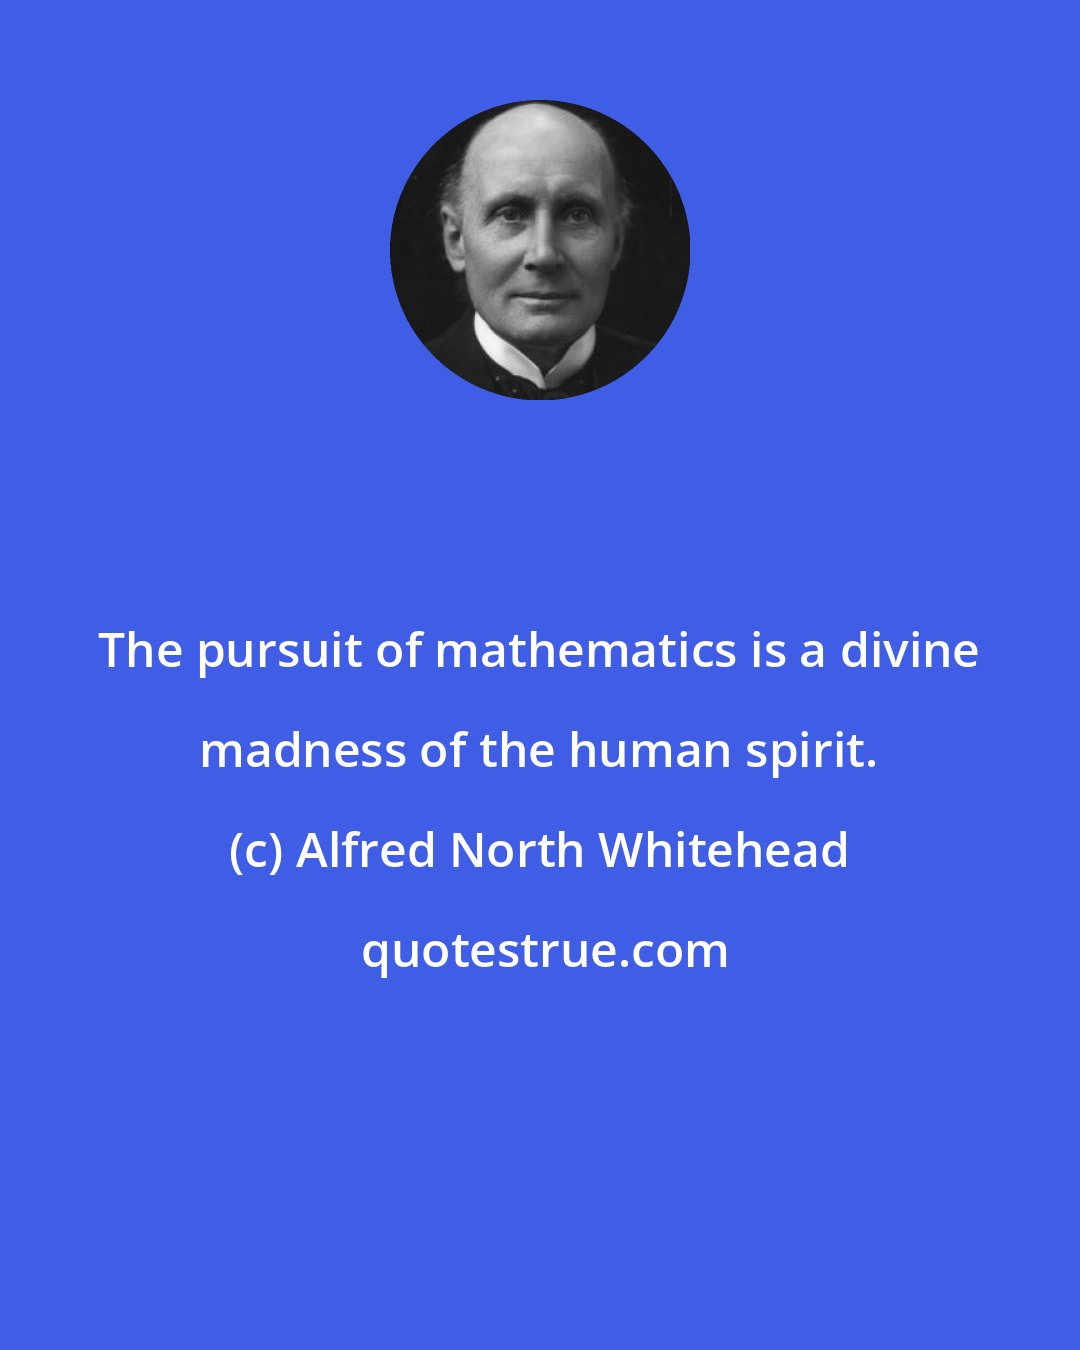 Alfred North Whitehead: The pursuit of mathematics is a divine madness of the human spirit.